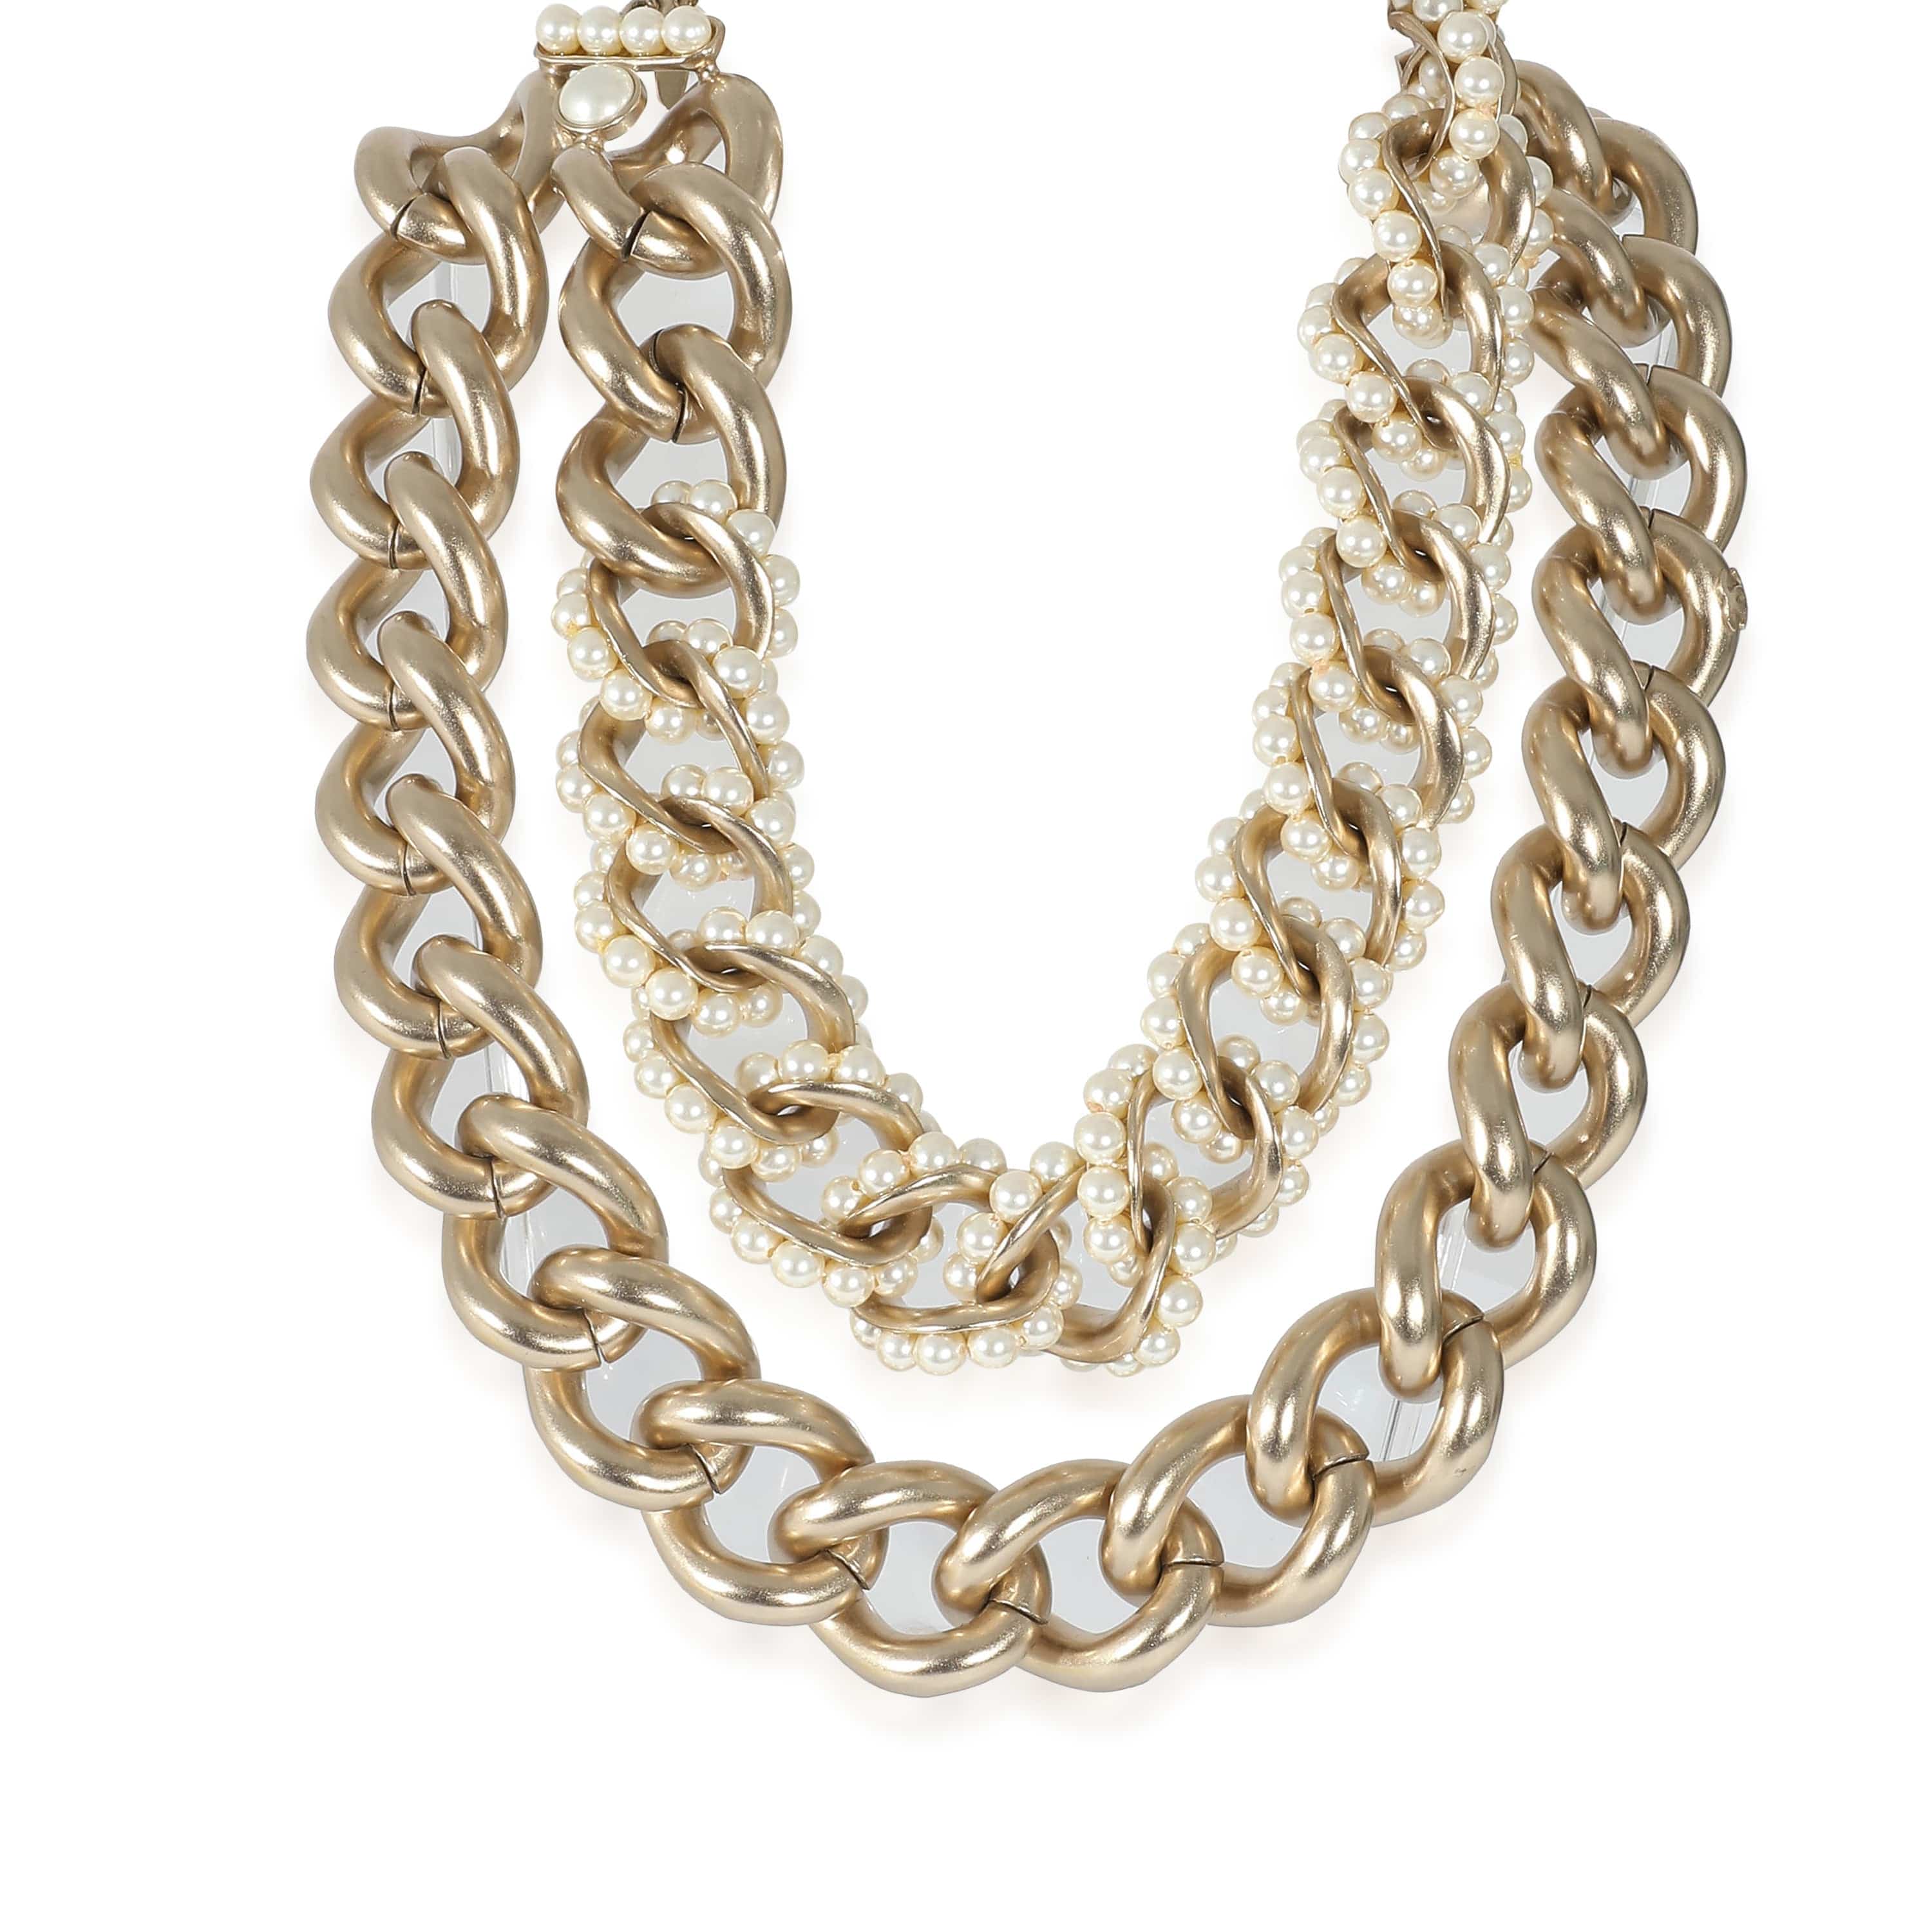 Gold Tone Chanel 2013 Double Curb Chain Choker With Faux Pearls